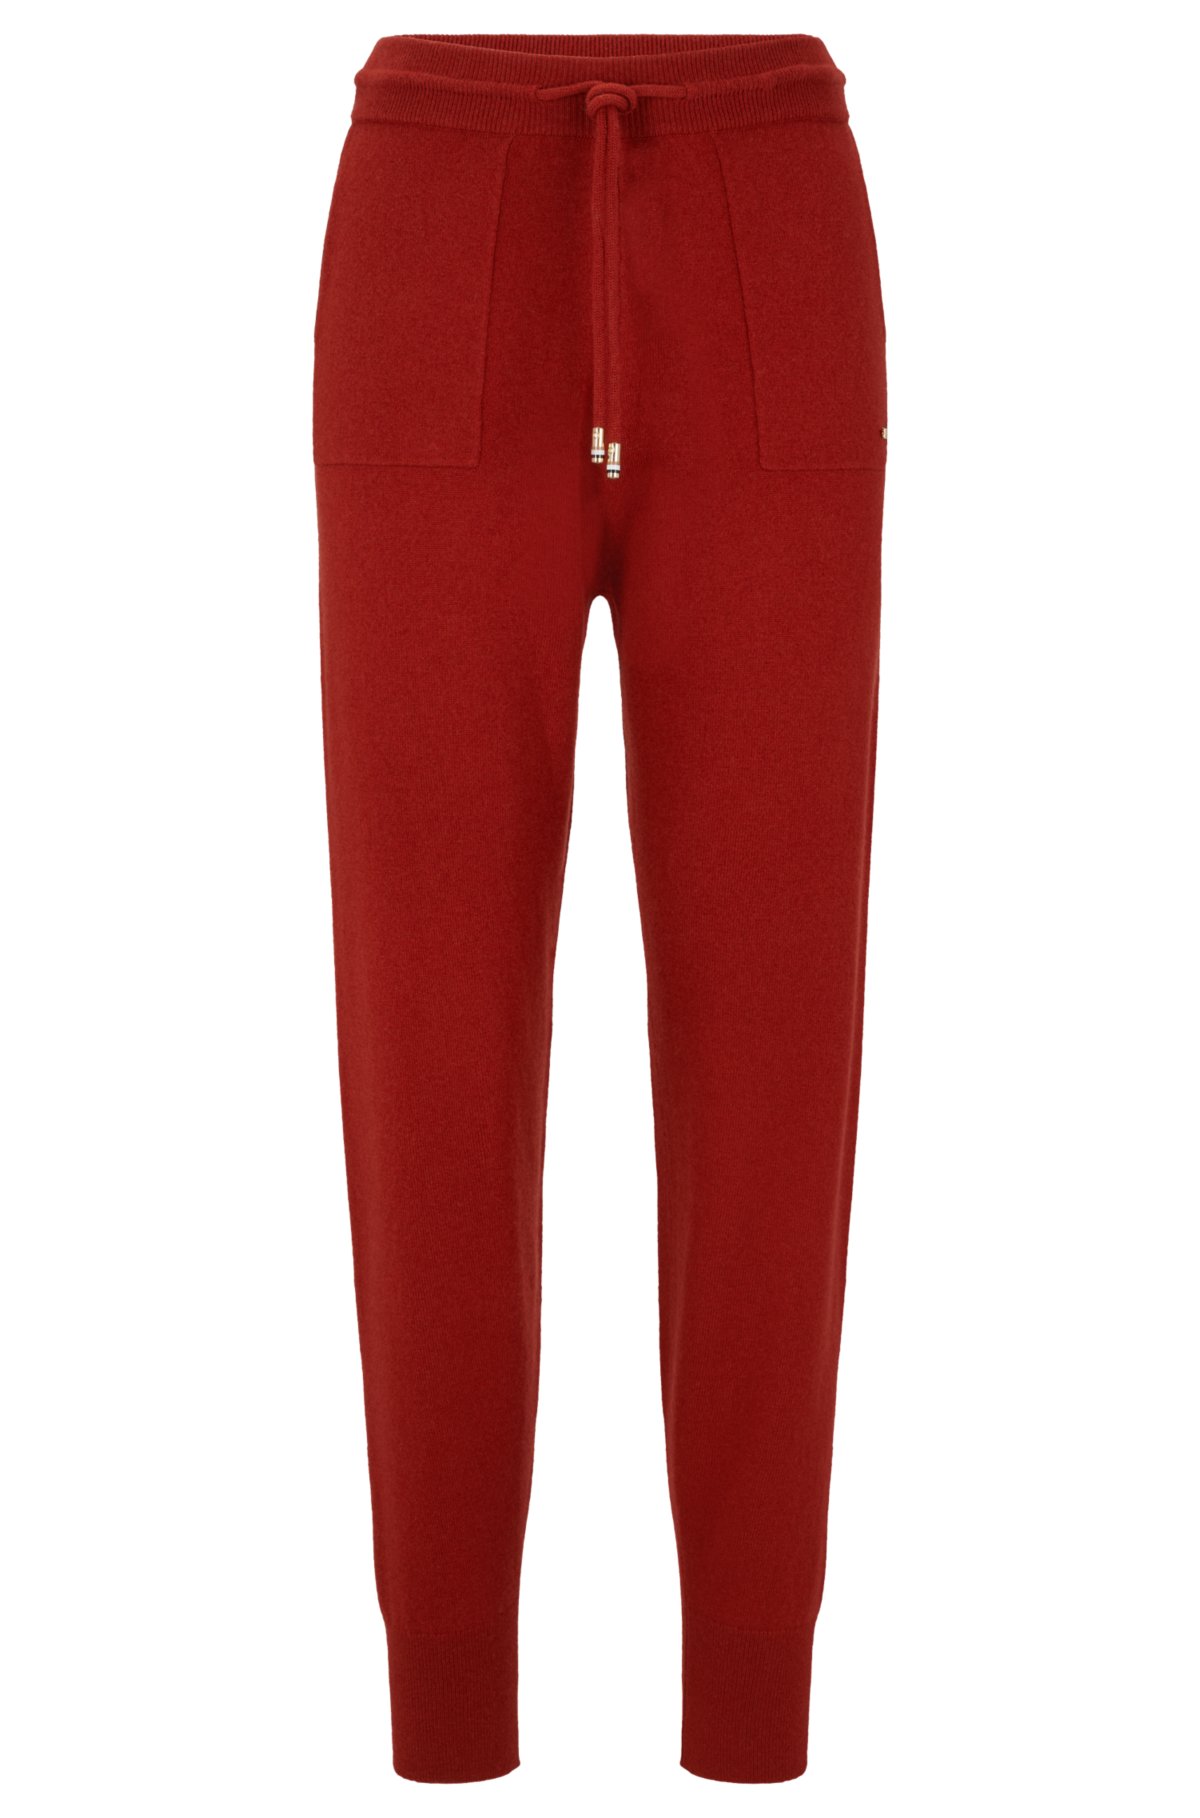 Red Joggers Women